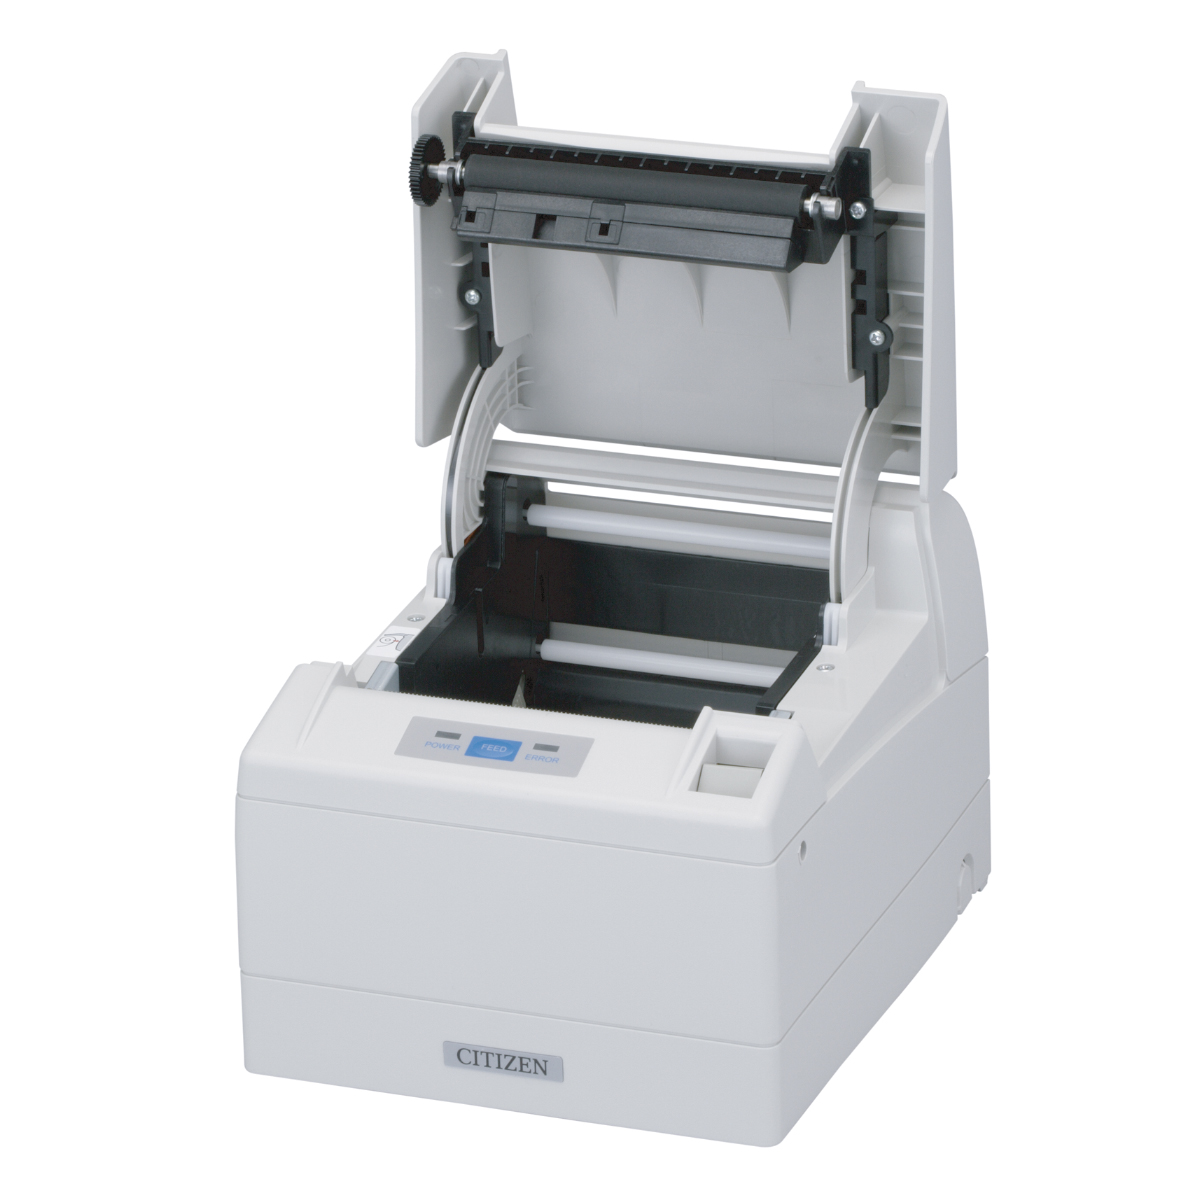 Black 112 mm Paper 150 mm/Sec Print Speed Citizen America CT-S4000RSU-BK CT-S4000 Series POS Thermal Printer 69 Columns RS-232C Serial and USB Connection 